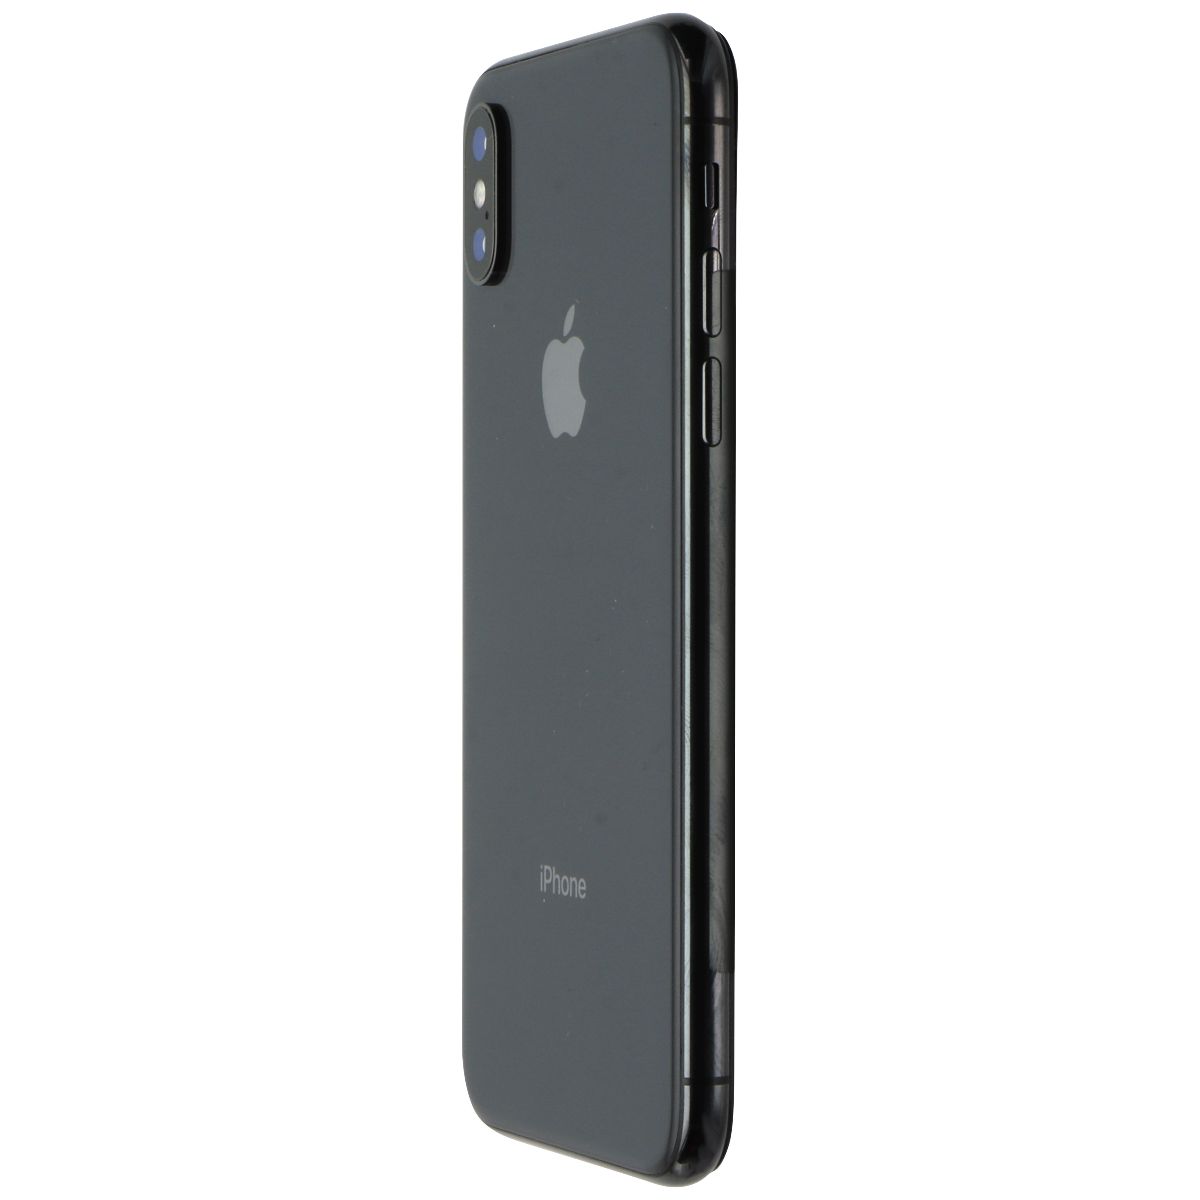 Apple iPhone X (5.8-inch) Smartphone (A1865) Unlocked - 256GB / Space Gray